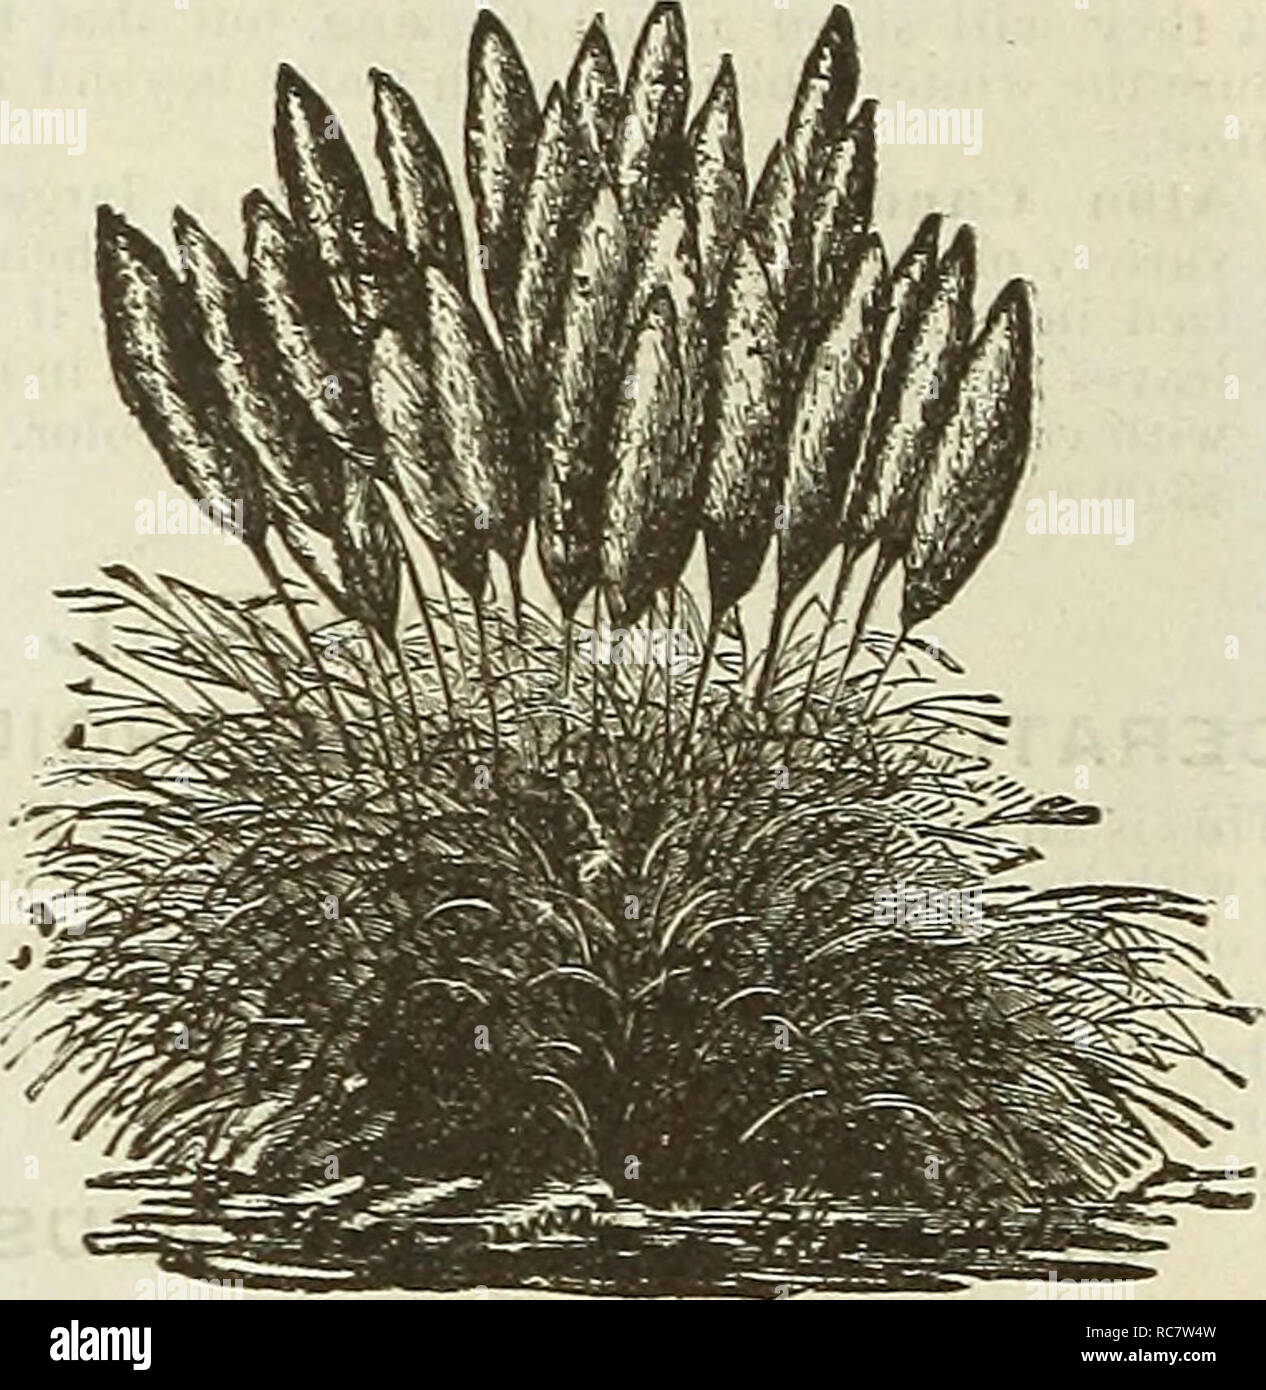 . Dreer's garden calendar : 1889. Seeds Catalogs; Nursery stock Catalogs; Gardening Equipment and supplies Catalogs; Flowers Seeds Catalogs; Fruit Seeds Catalogs; Vegetables Seeds Catalogs. ARUNDO. Doiiav. A magnificent hardy grass, growing to a hei^'ht of 15 feet, and forming dense clumps. It sliould be left undisturbed, as it increases in vigor and attractiveness from vear to year. 25 cts. to §1.00 each. Donax Variegata. A hardy, broad-leaved, va- riegated bamboo; foliage &quot;creamy white and green, retaining its bright, fresh color until frost; growing G to S feet lifgh, of graceful form  Stock Photo